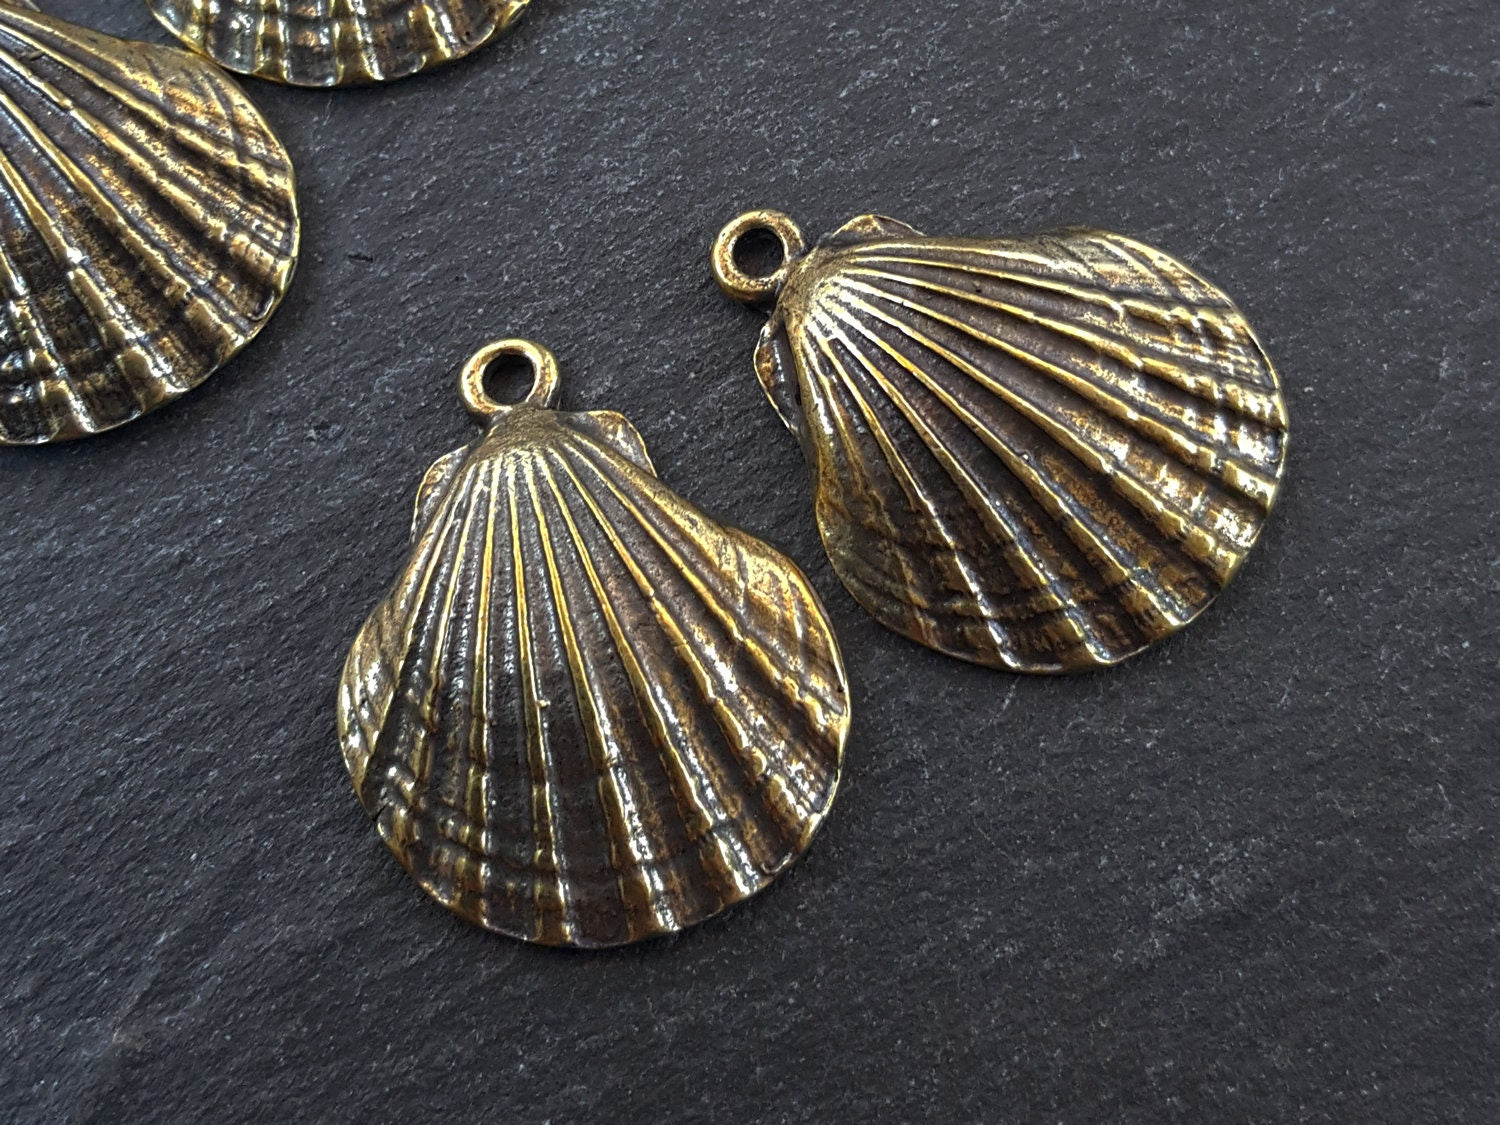 Bronze Shell Charms, Scallop Shell, Cockle Shell, Seashell Charms, Clam Shell, Shell Pendant, Beach Charm, Antique Bronze Plated 2pc